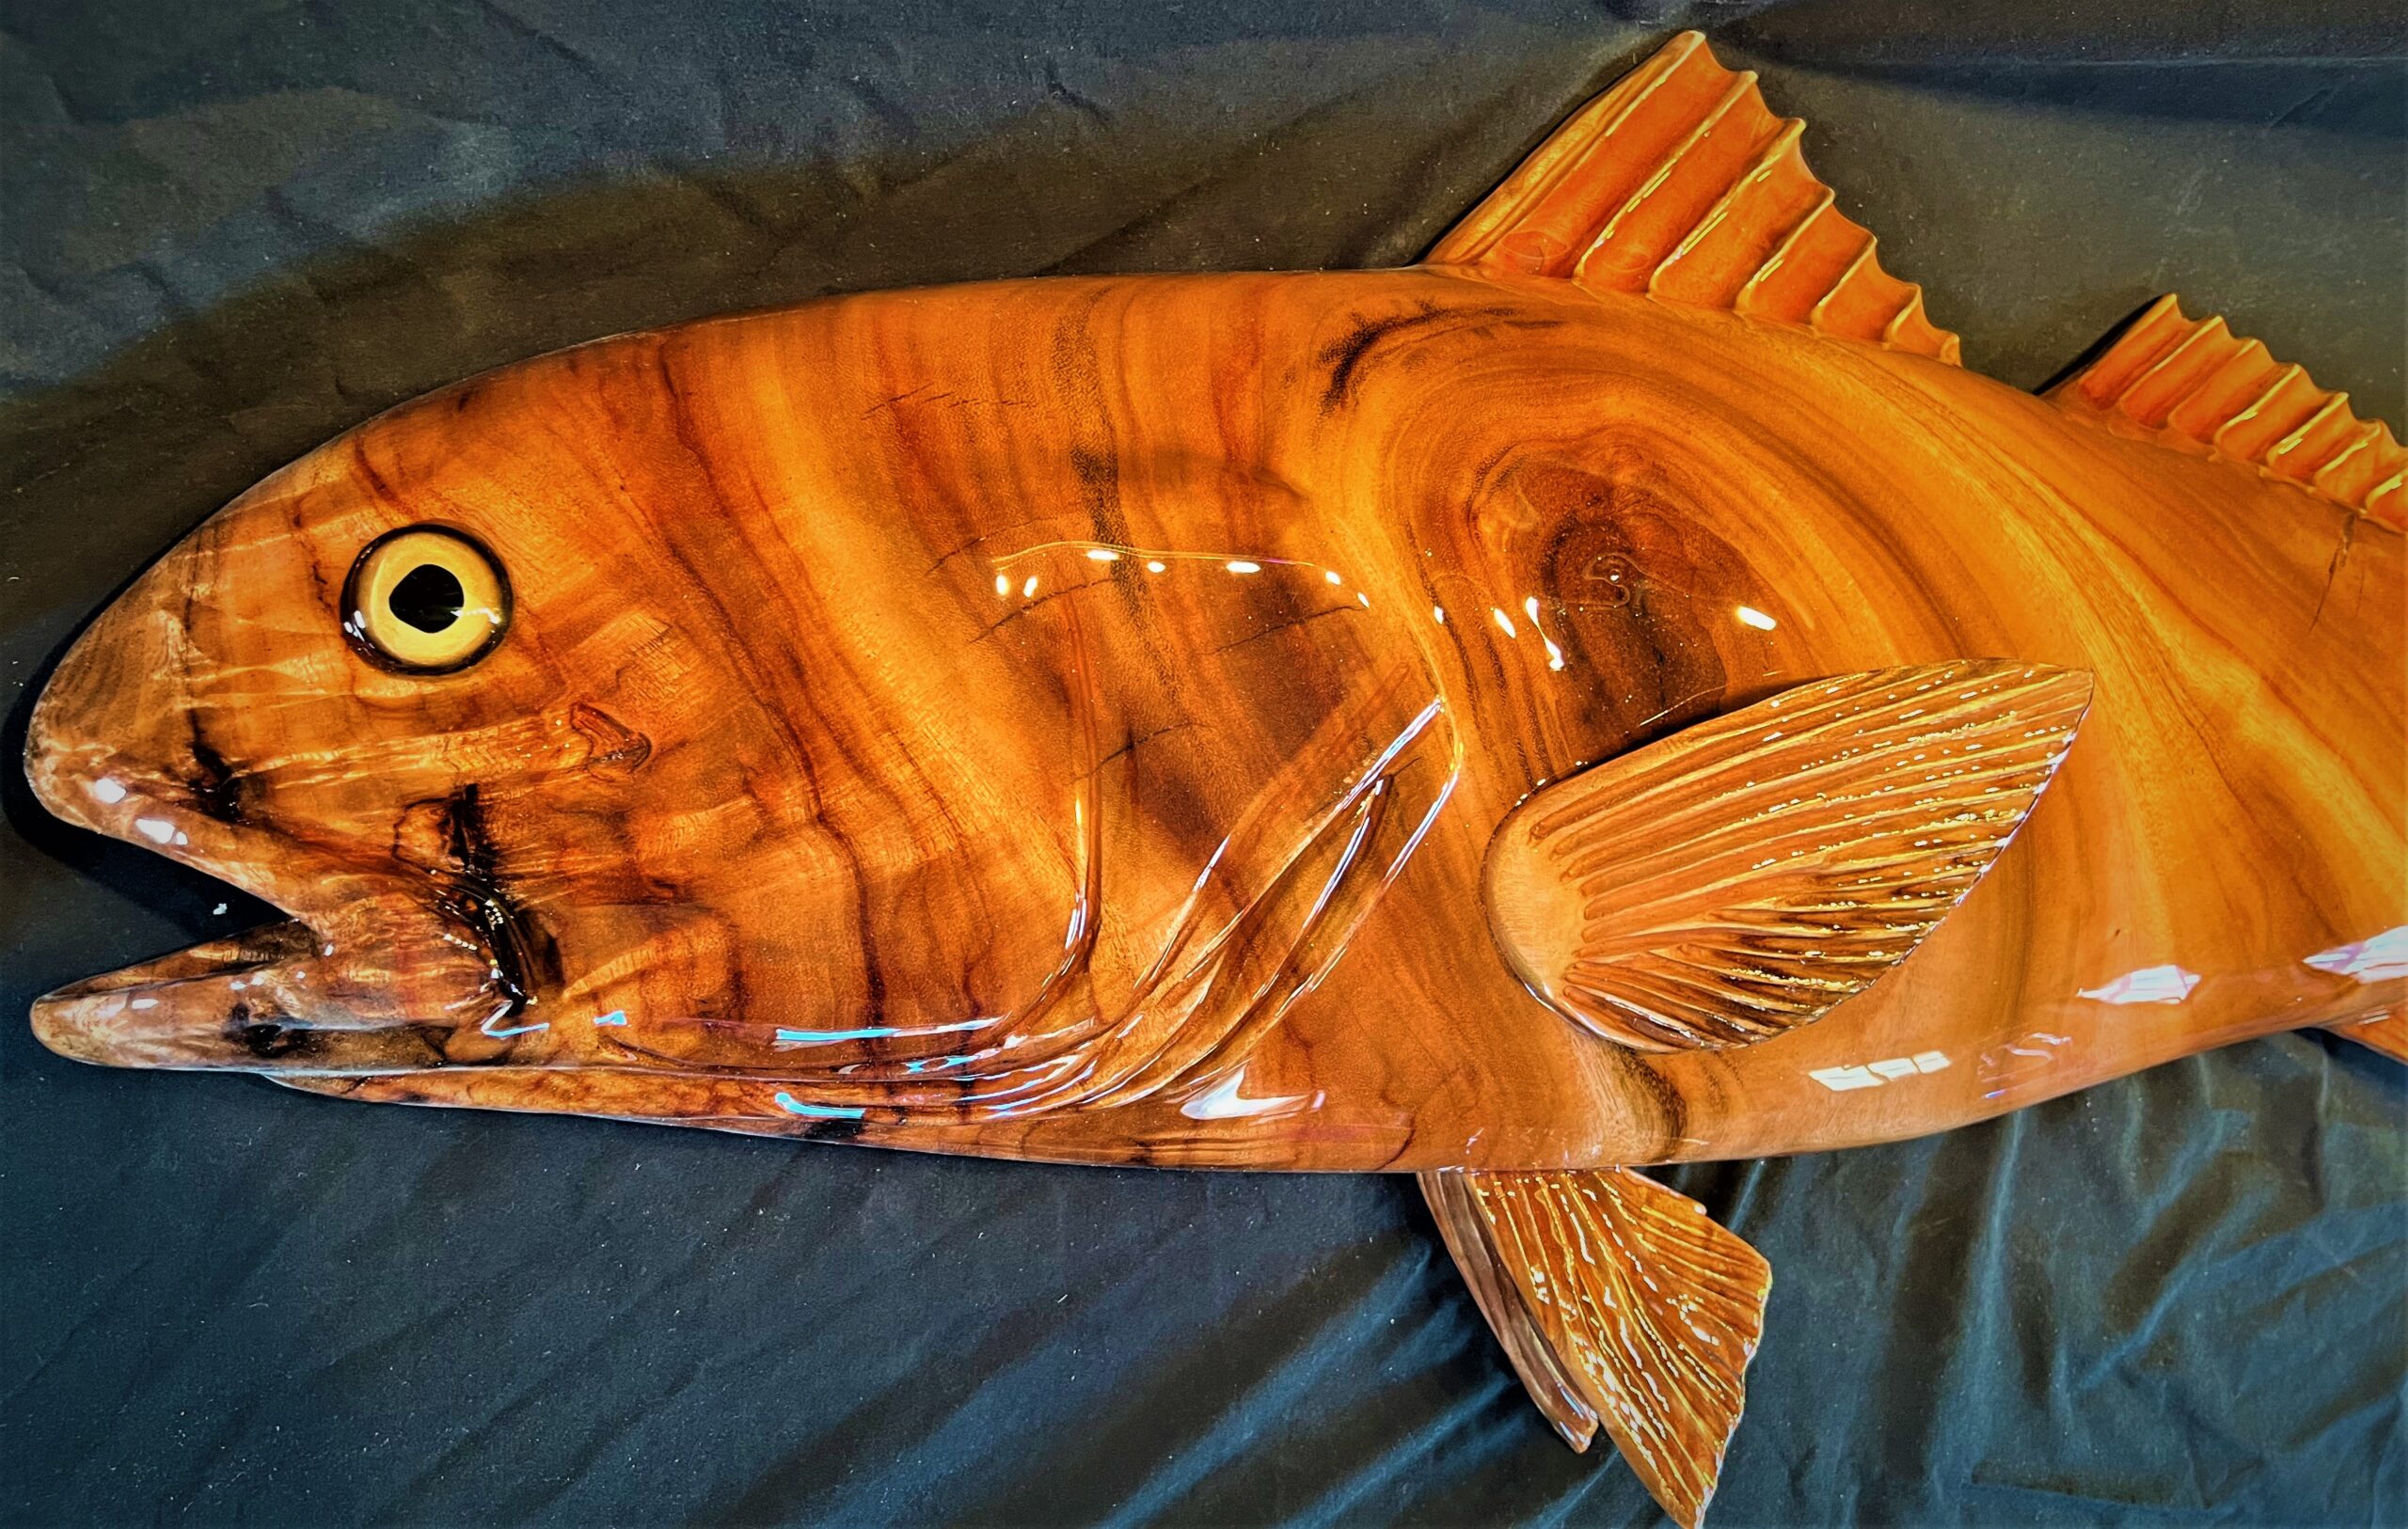 44″ Rescued Camphor Wood Red Fish Sculpture/Carving Wall Mount Art